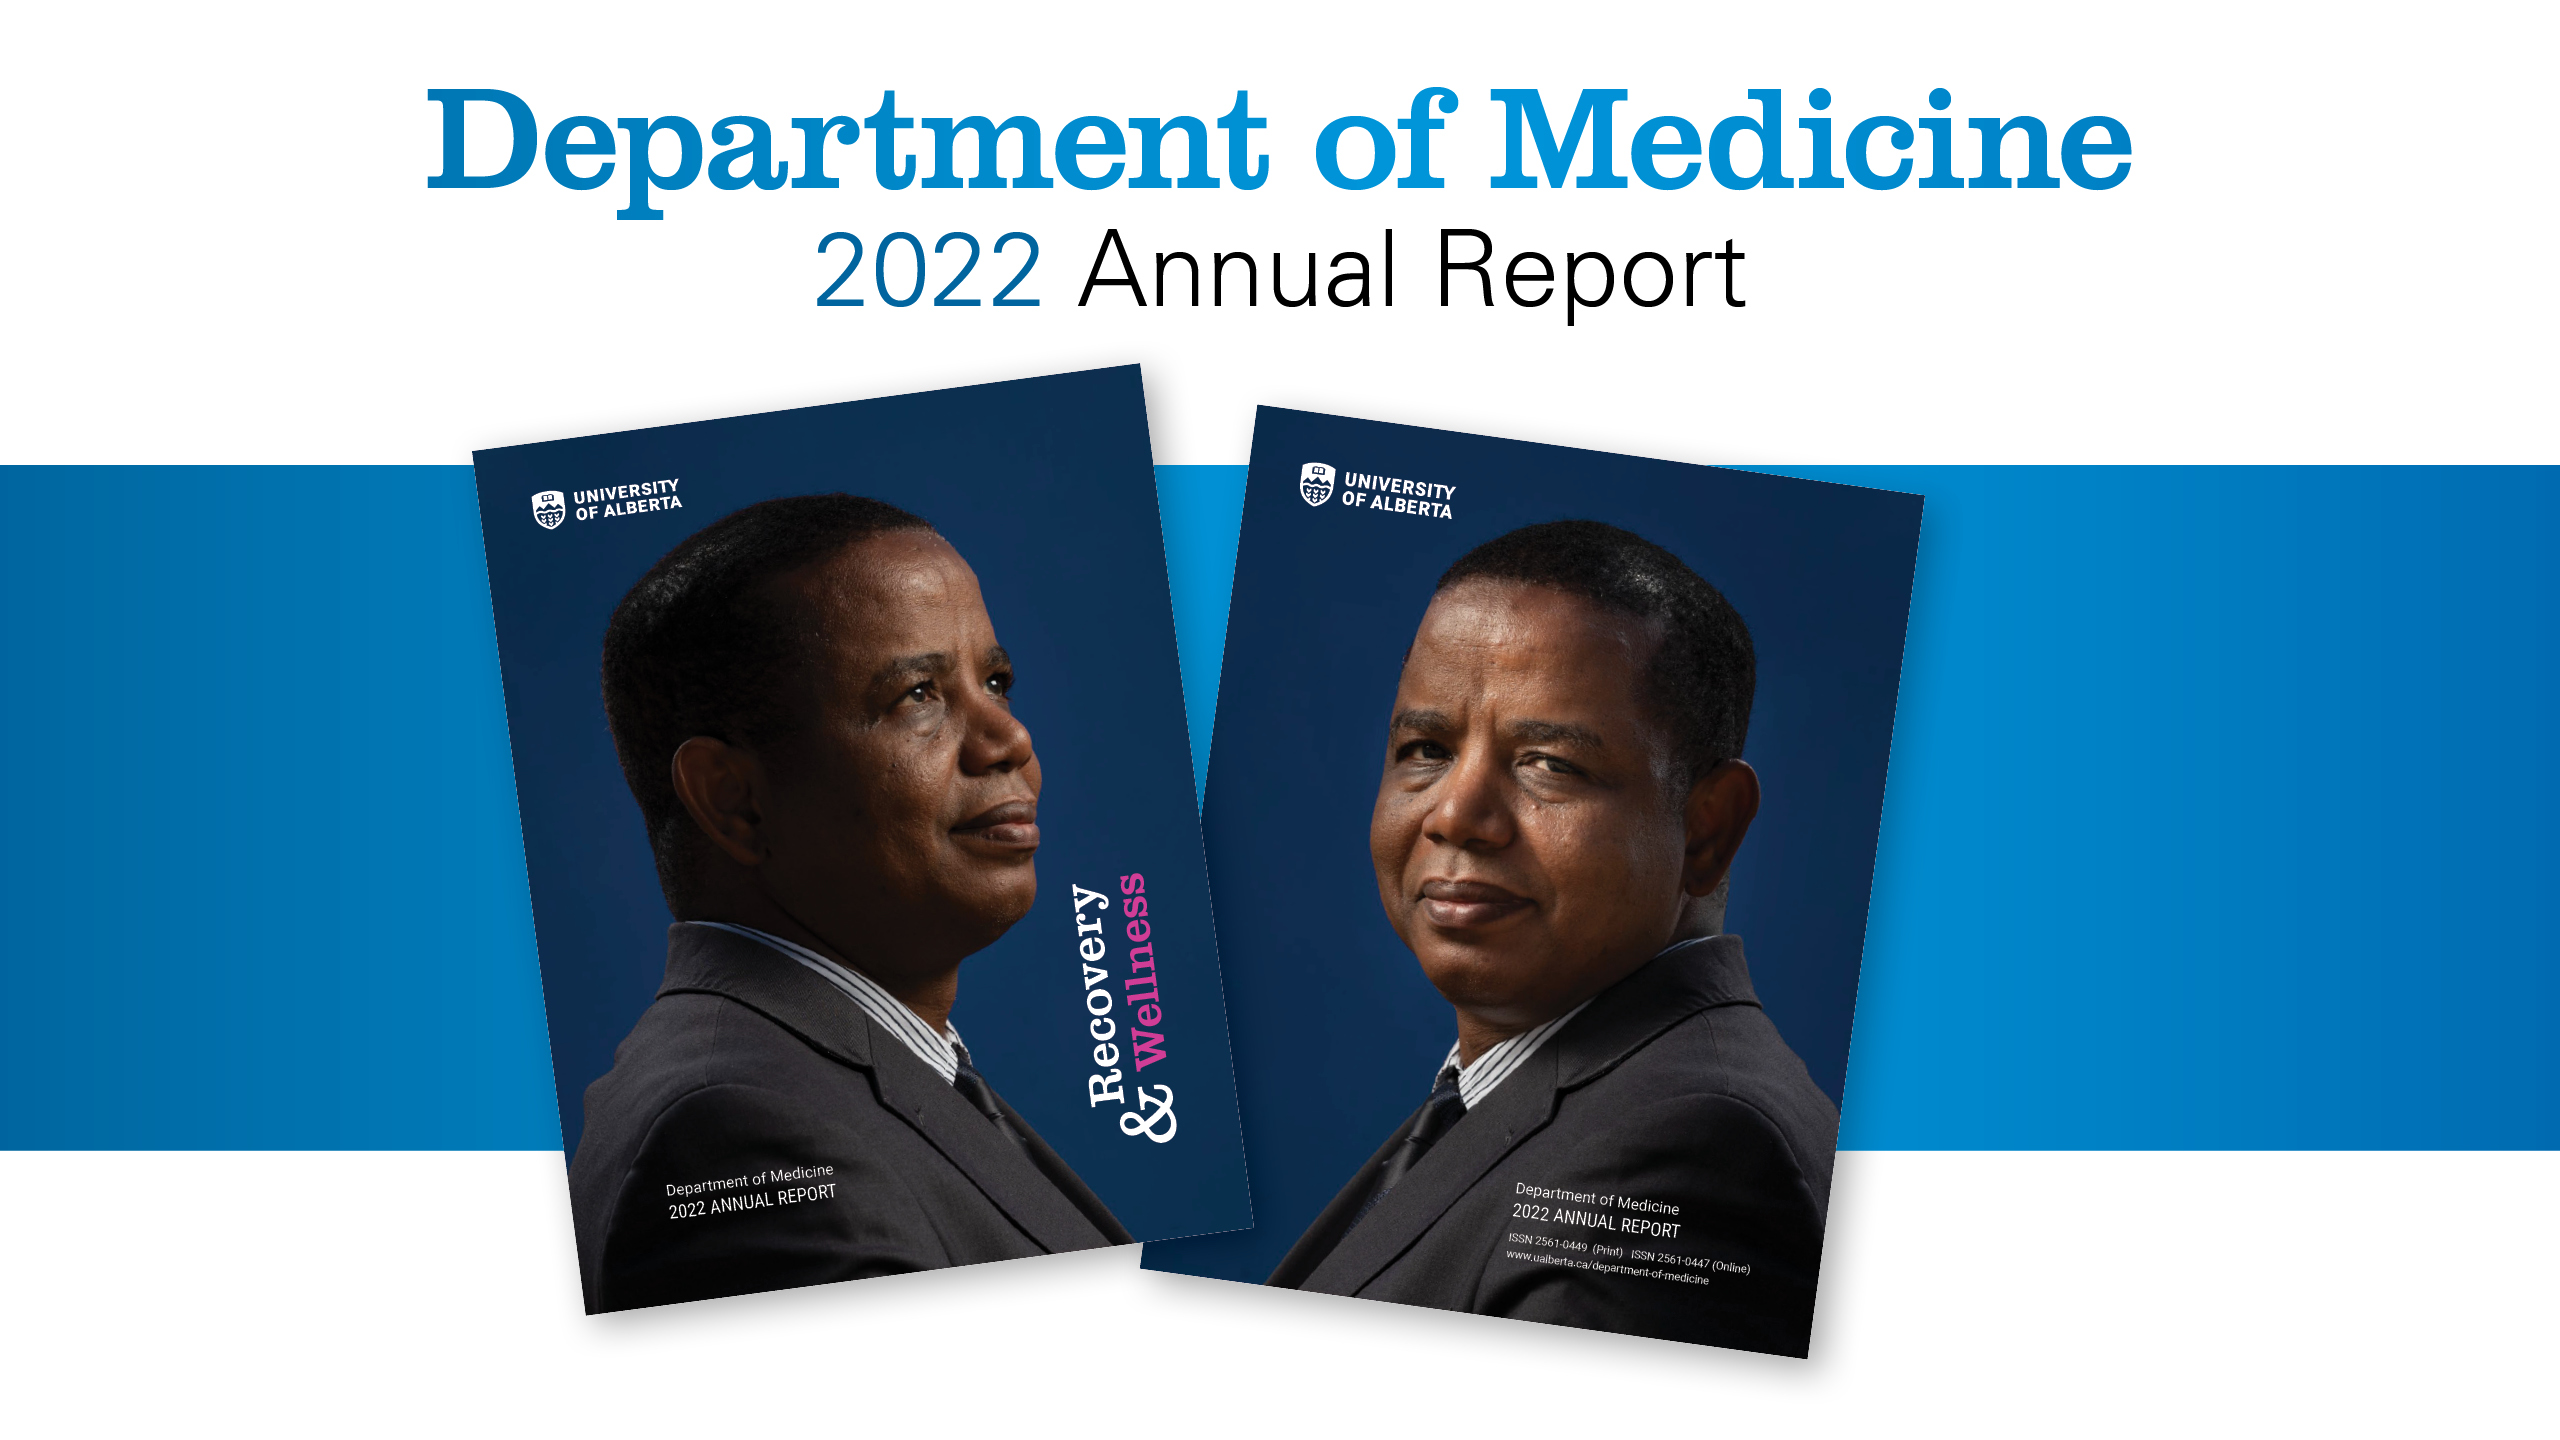 Cover of the Department of Medicine's 2022 Annual Report featuring Dr. Aminu Bello 